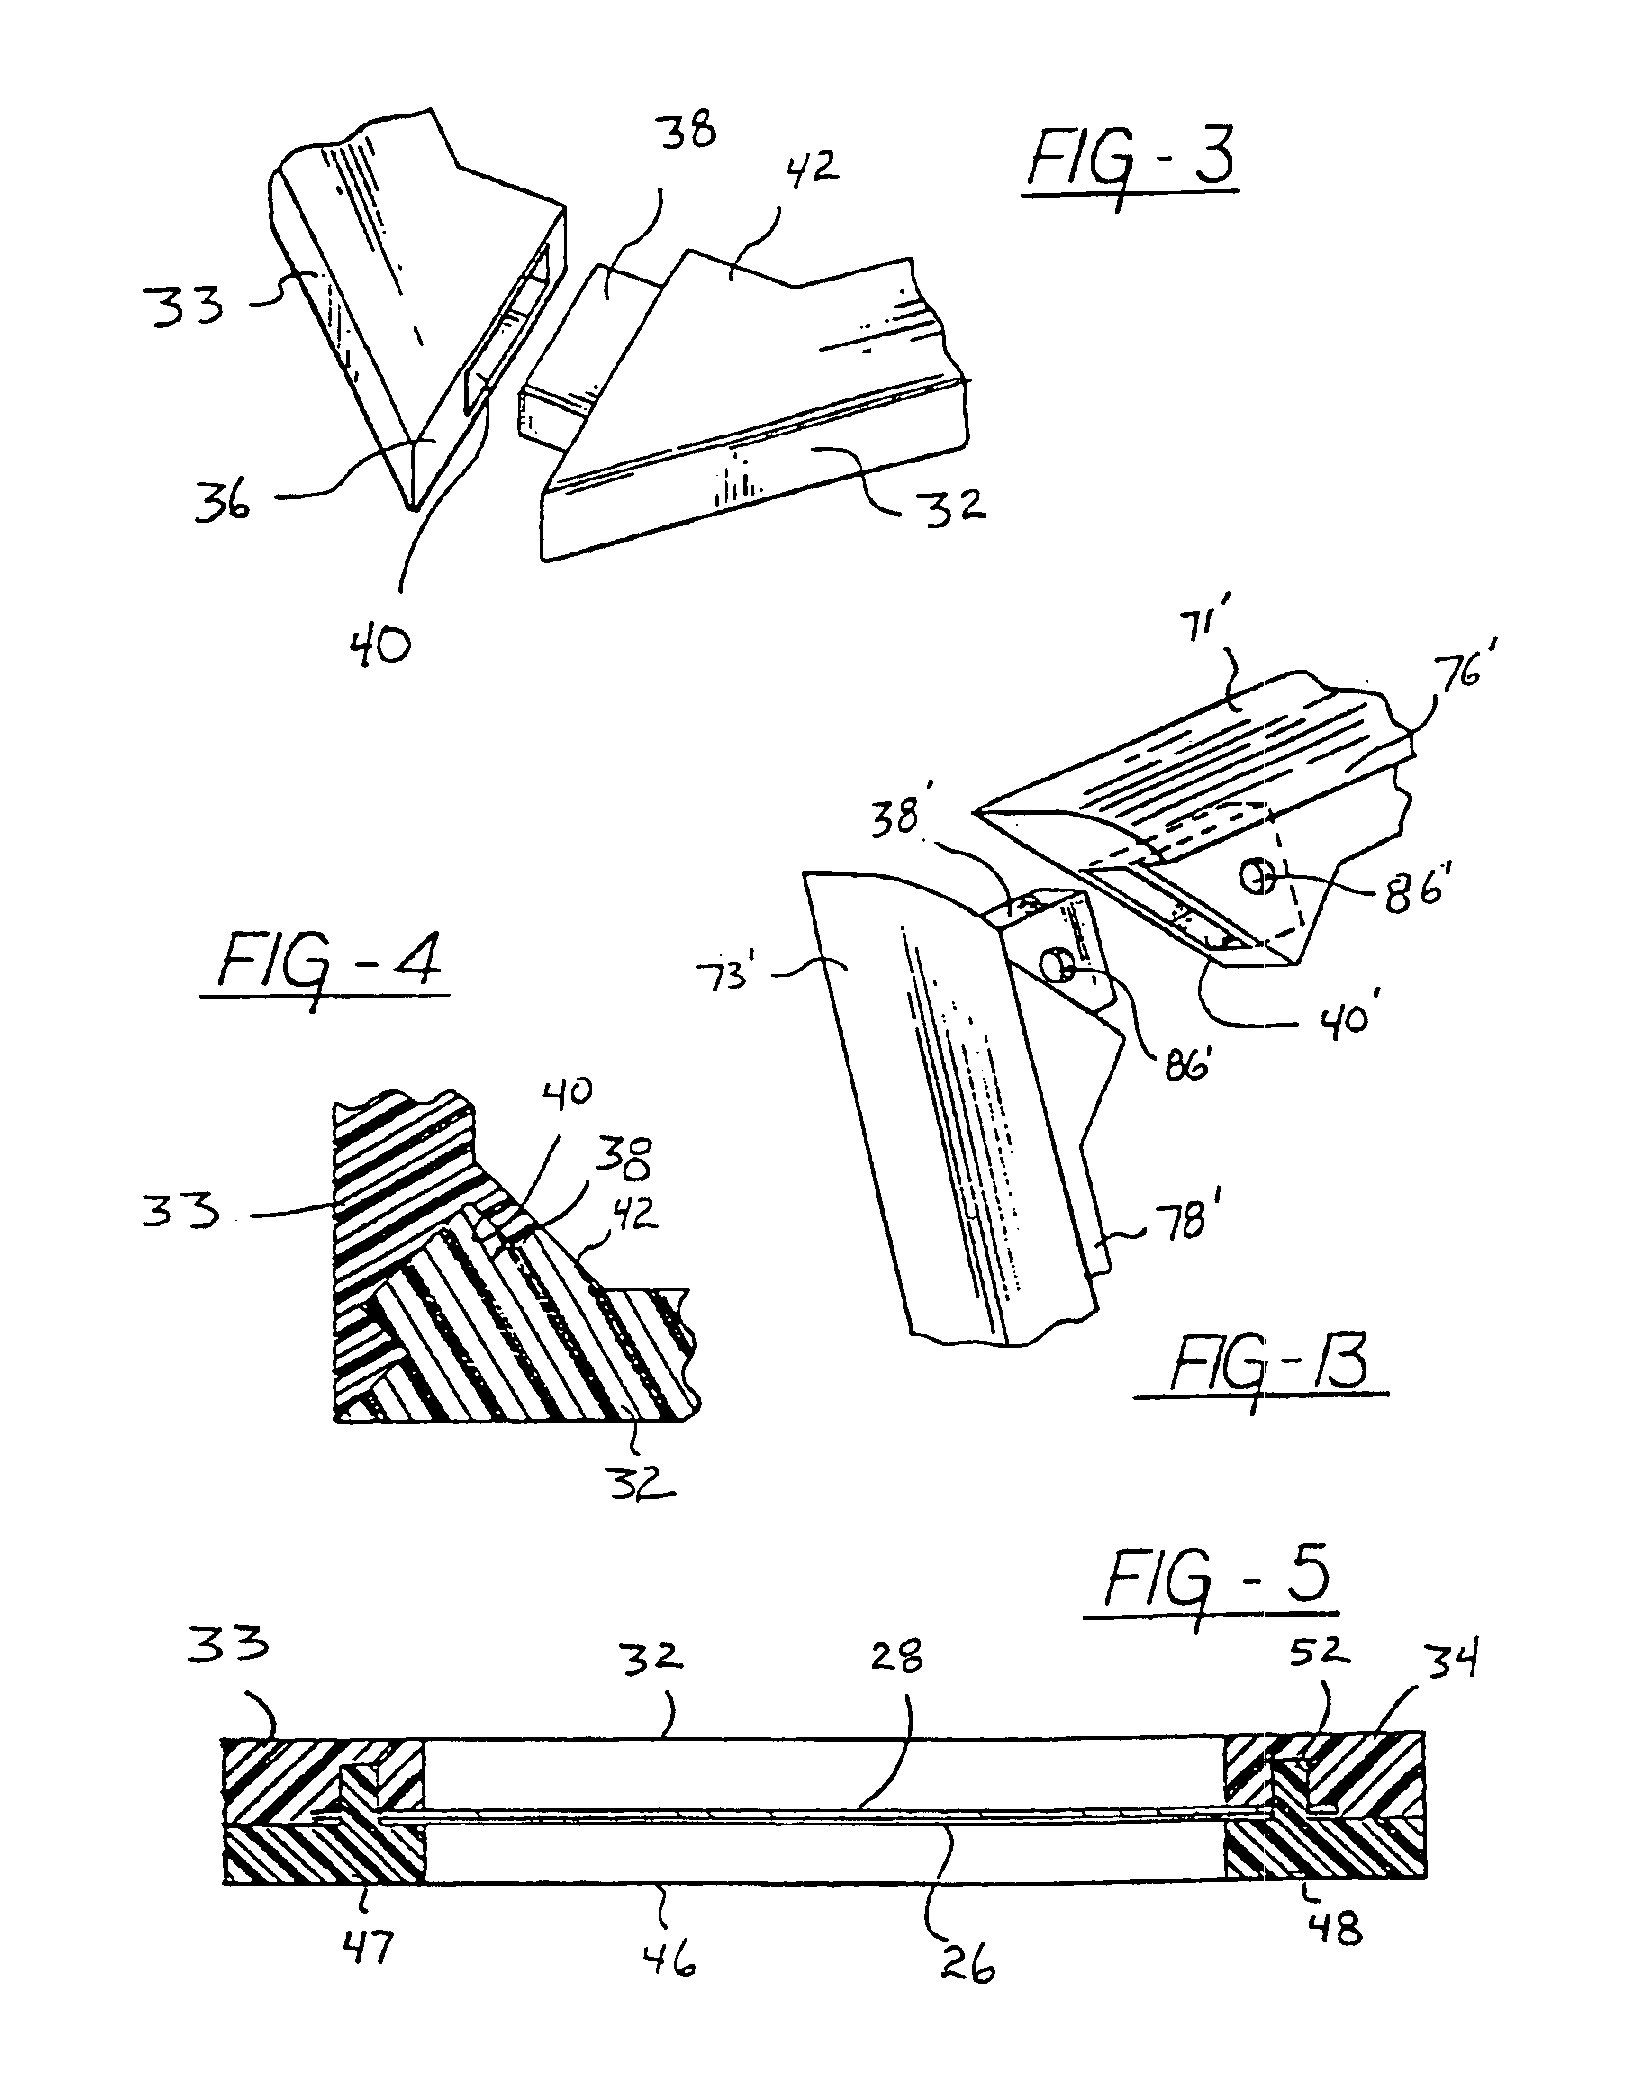 Framing system for securing and displaying flat sheet materials